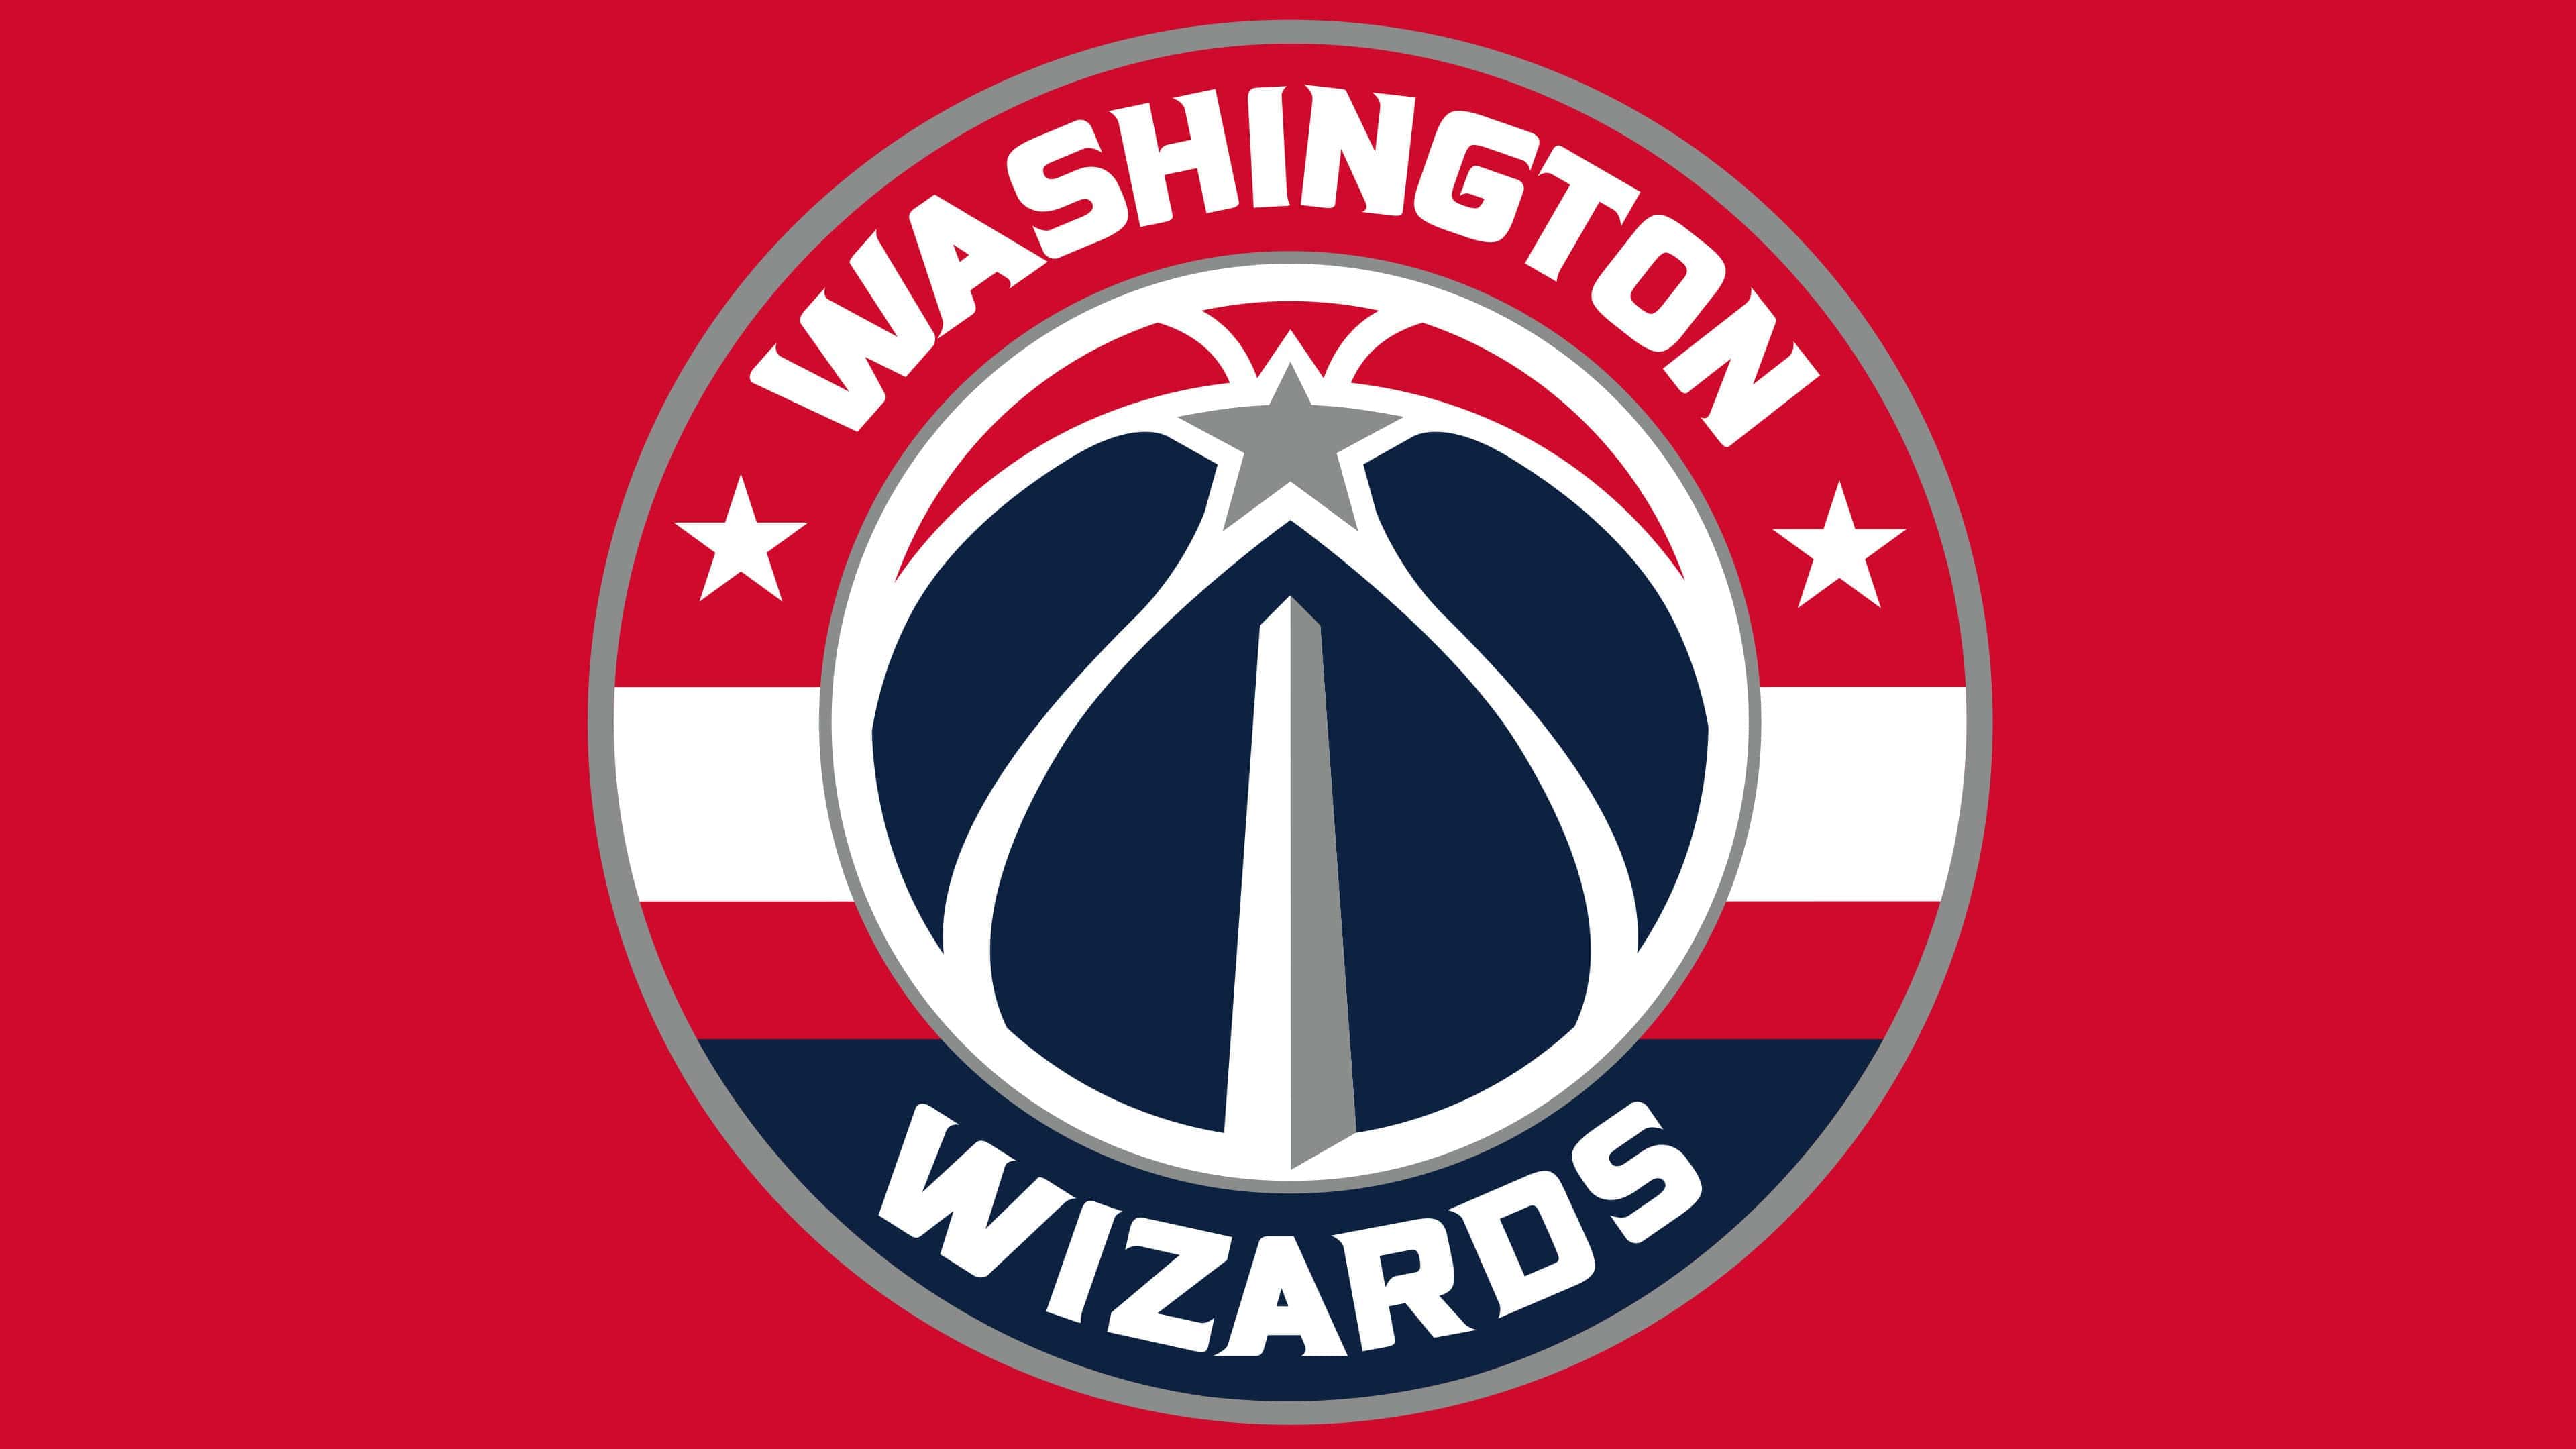 Washington Wizards Logo The Most Famous Brands And Company Logos In The World